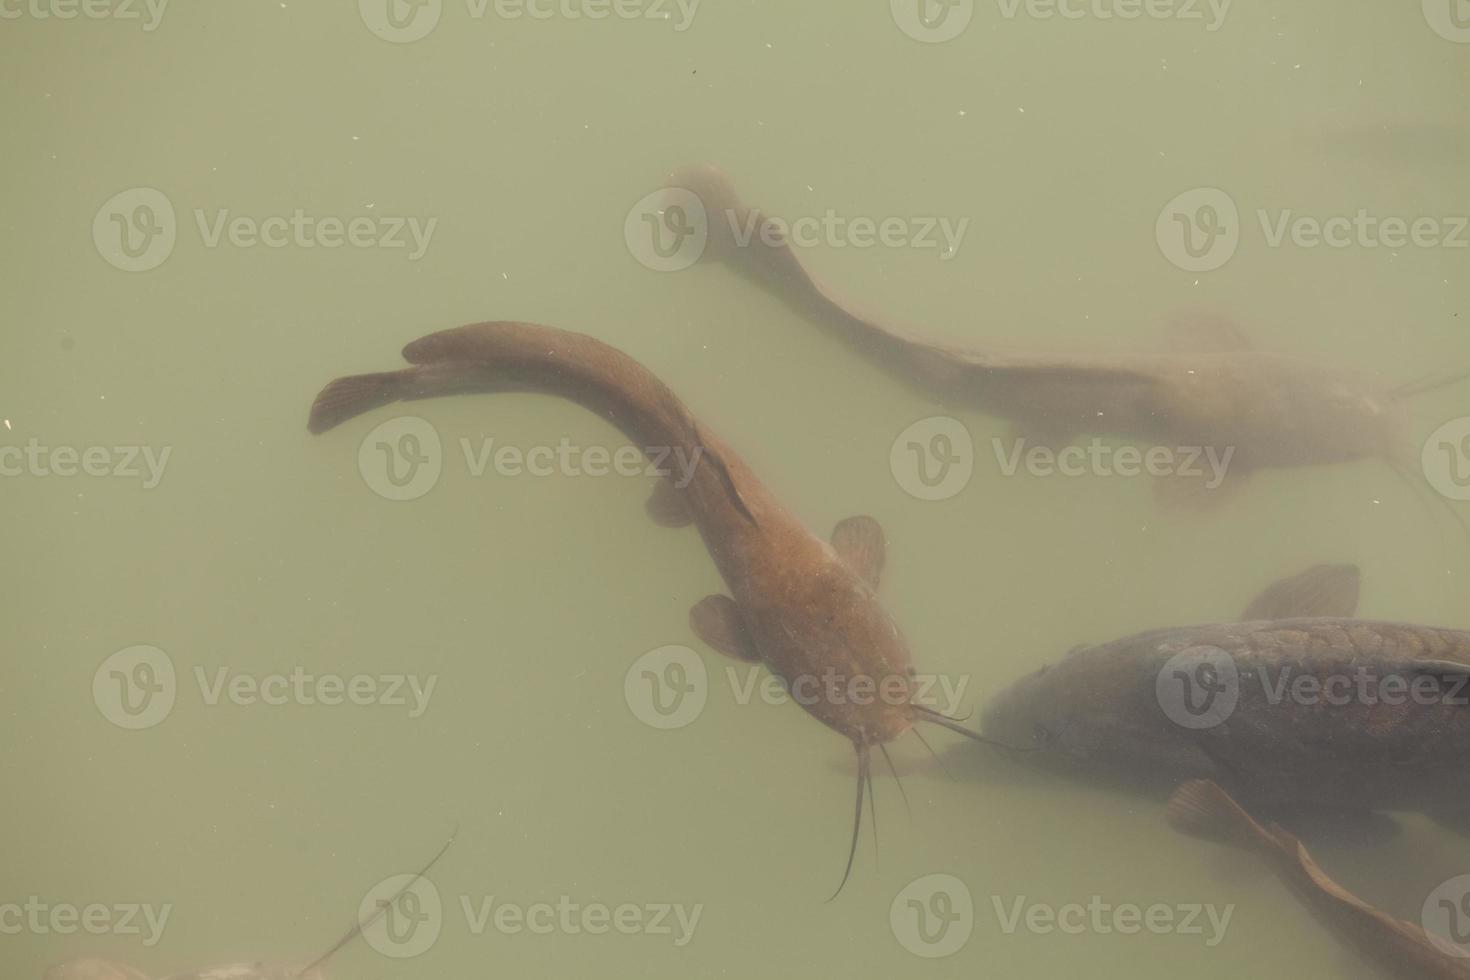 Catfish swims in a lake and swamp in Israel photo